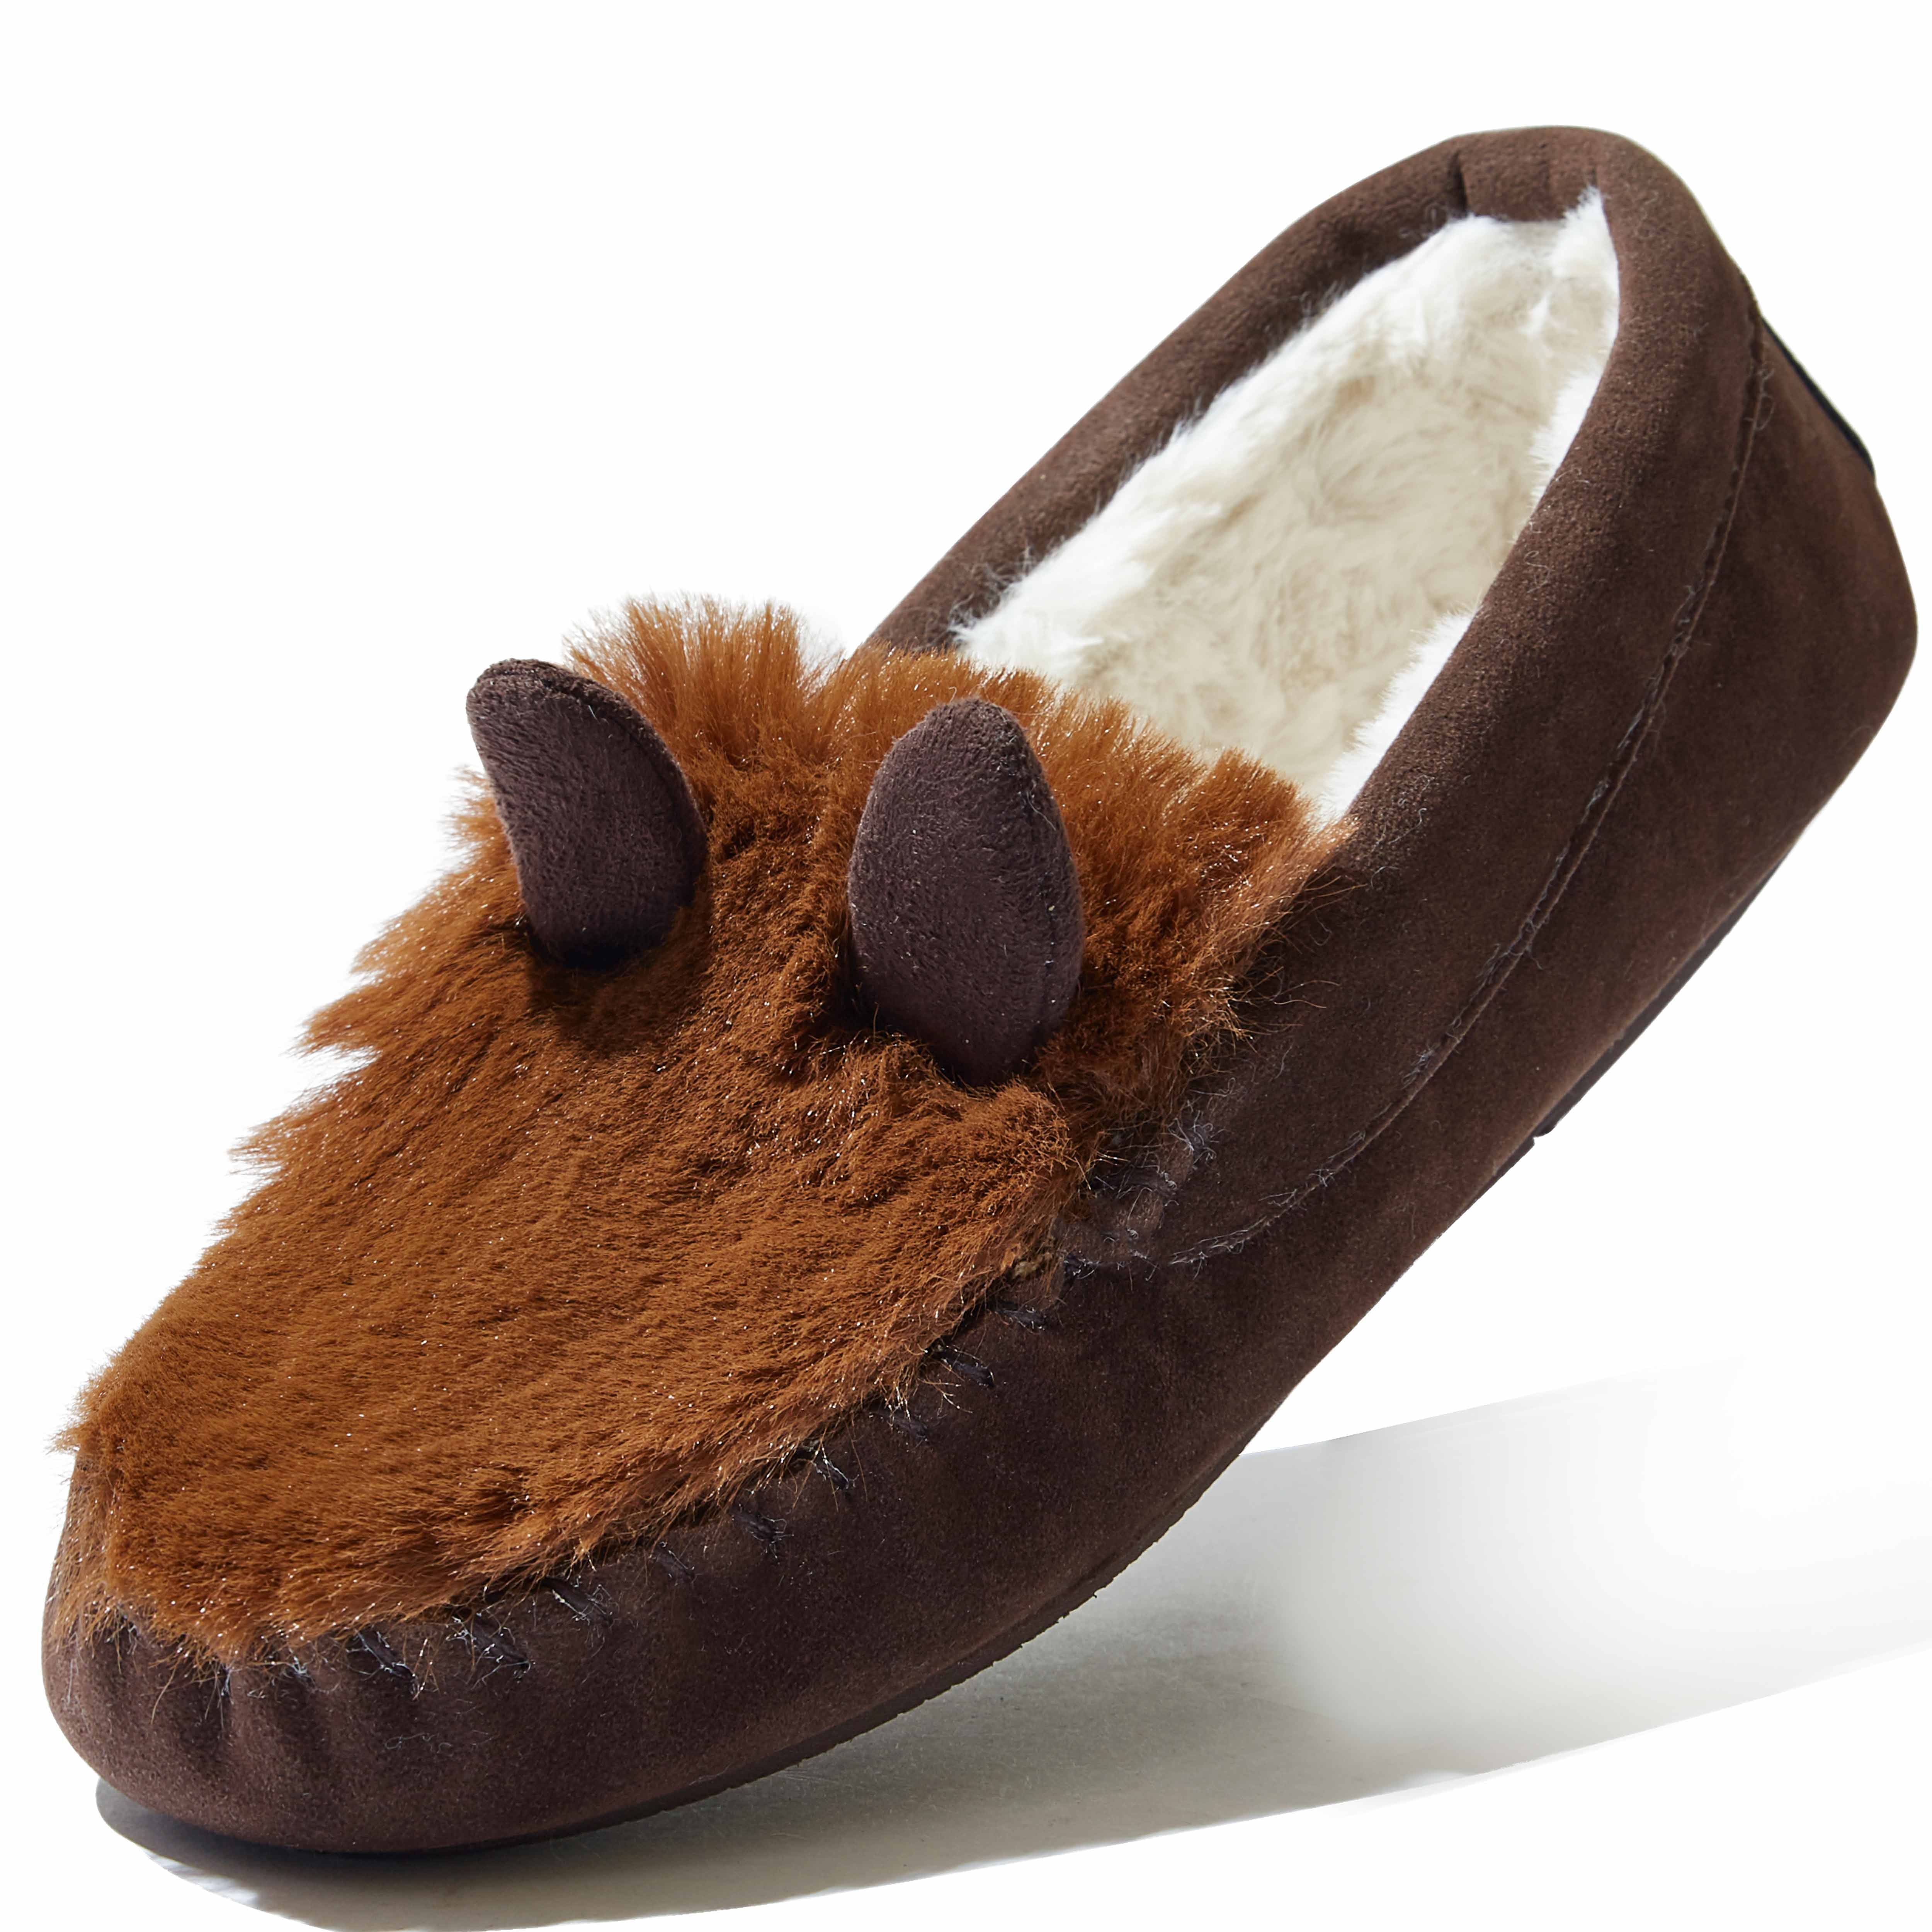 moccasin style shoes